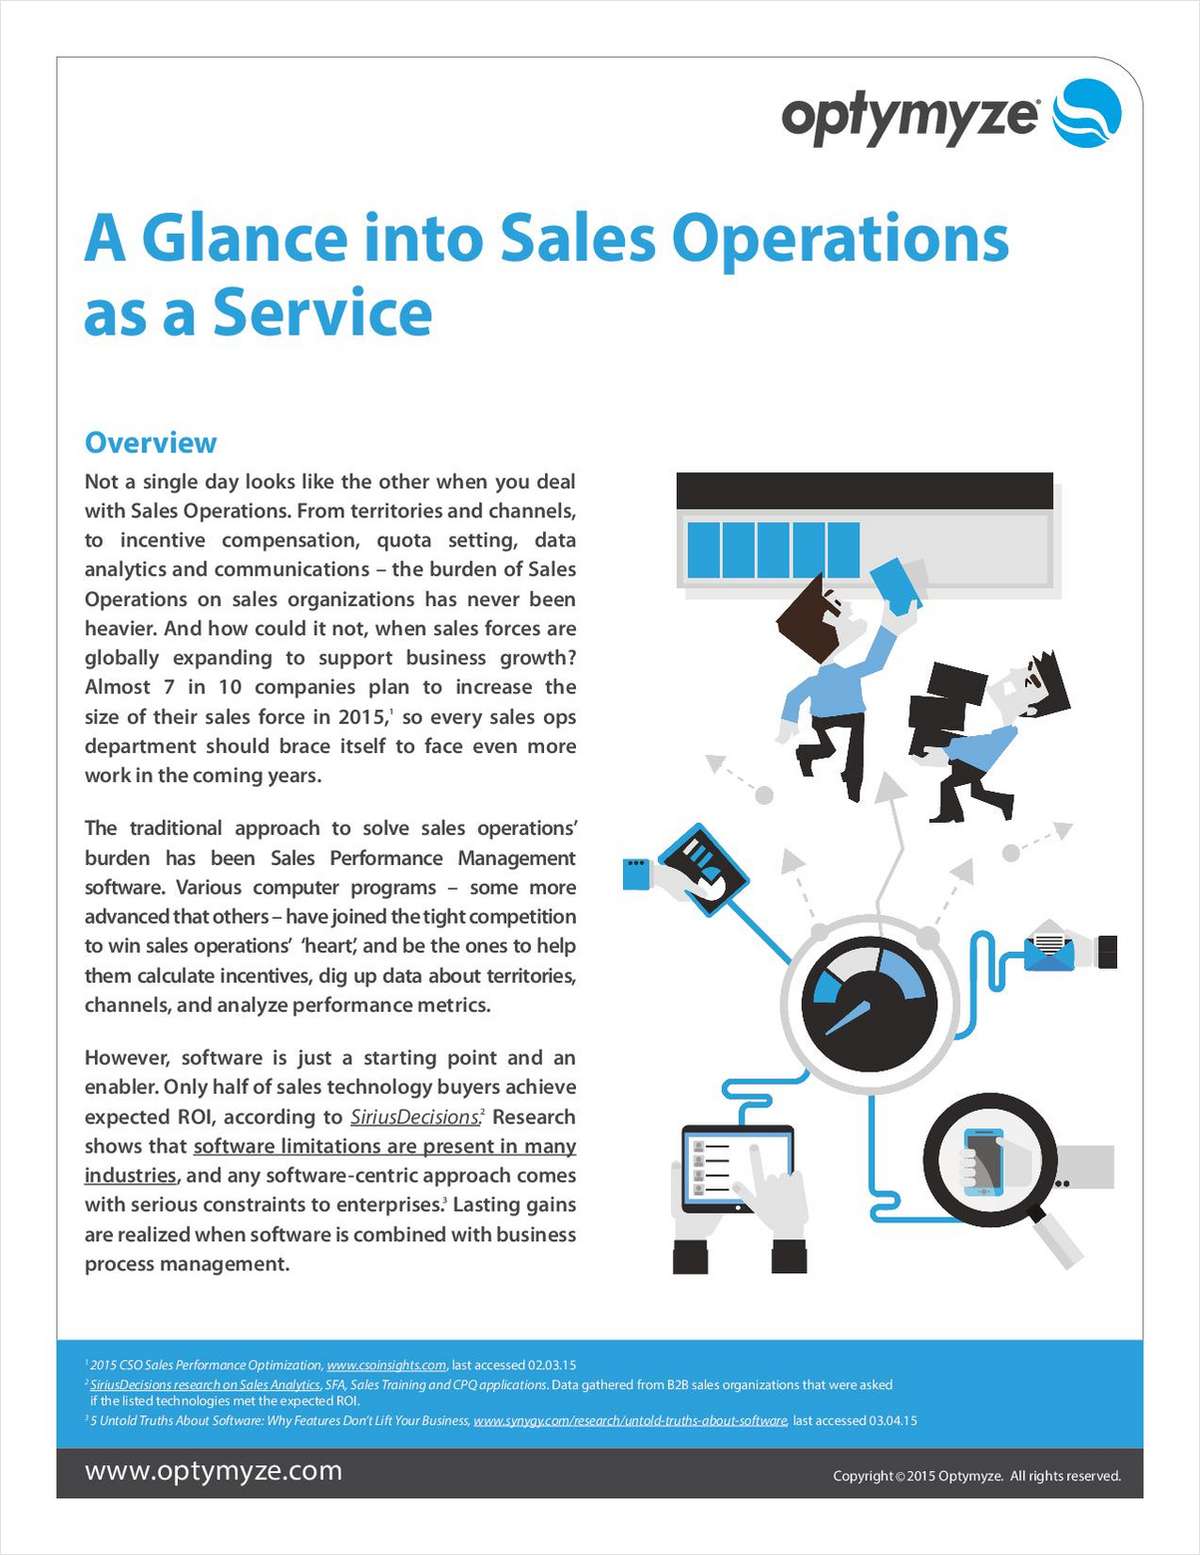 A Glance into Sales Operations as a Service